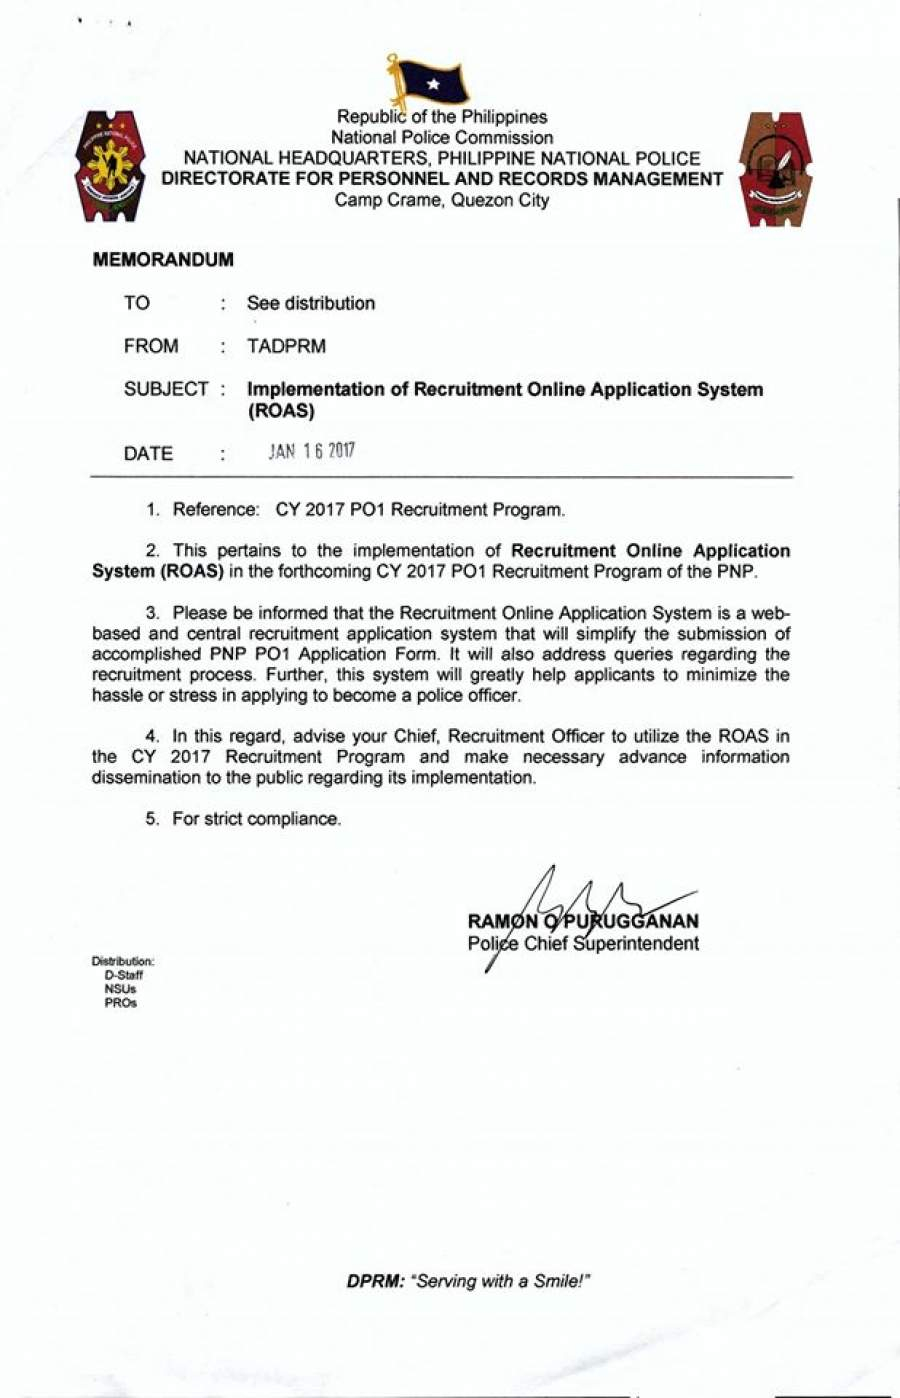 example of application letter for nup